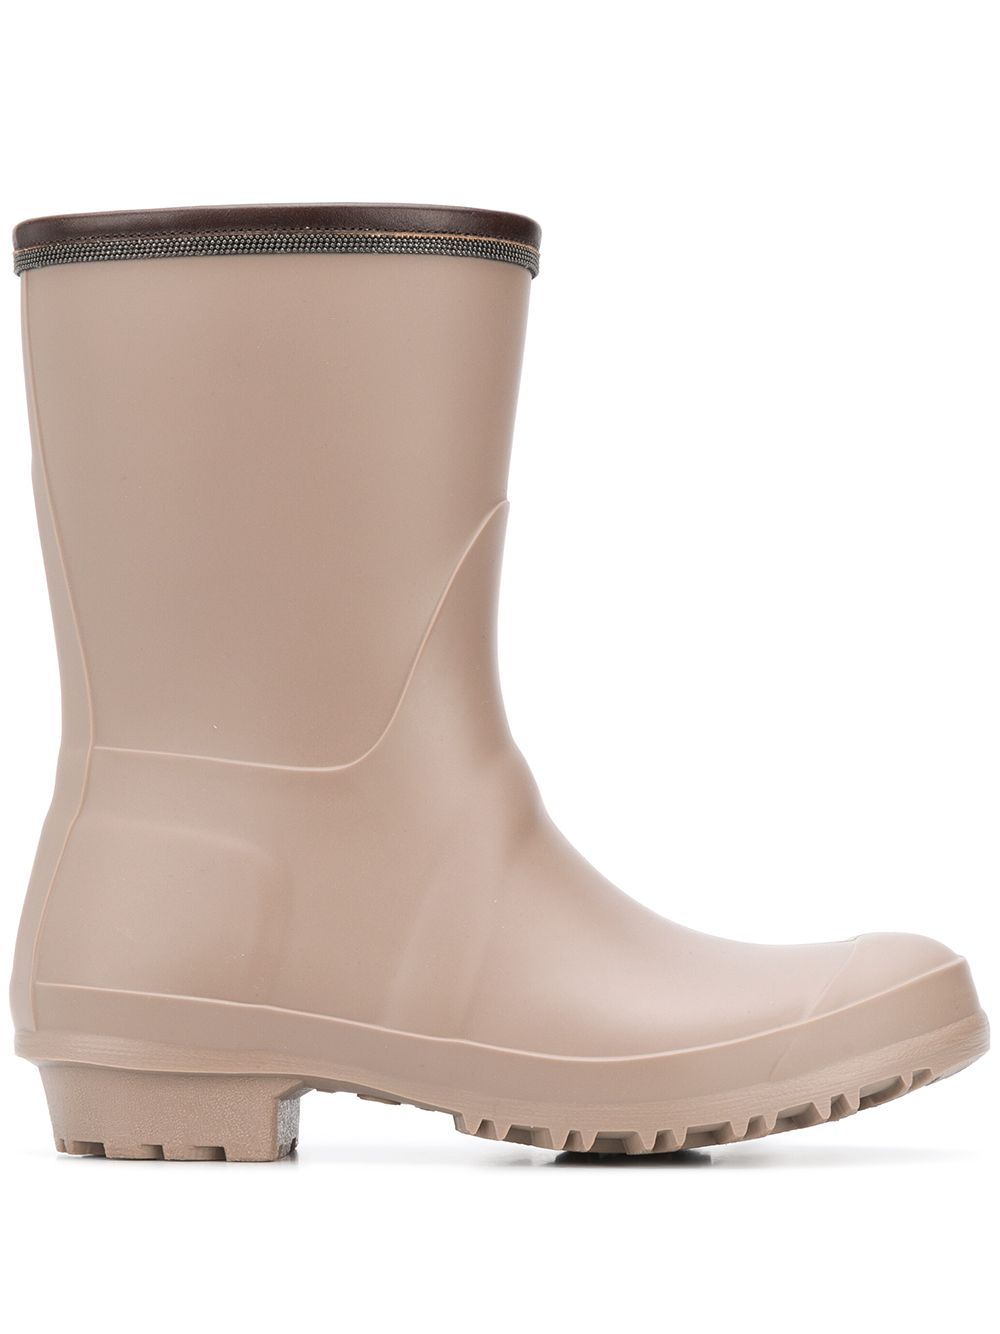 ankle length rubber boots